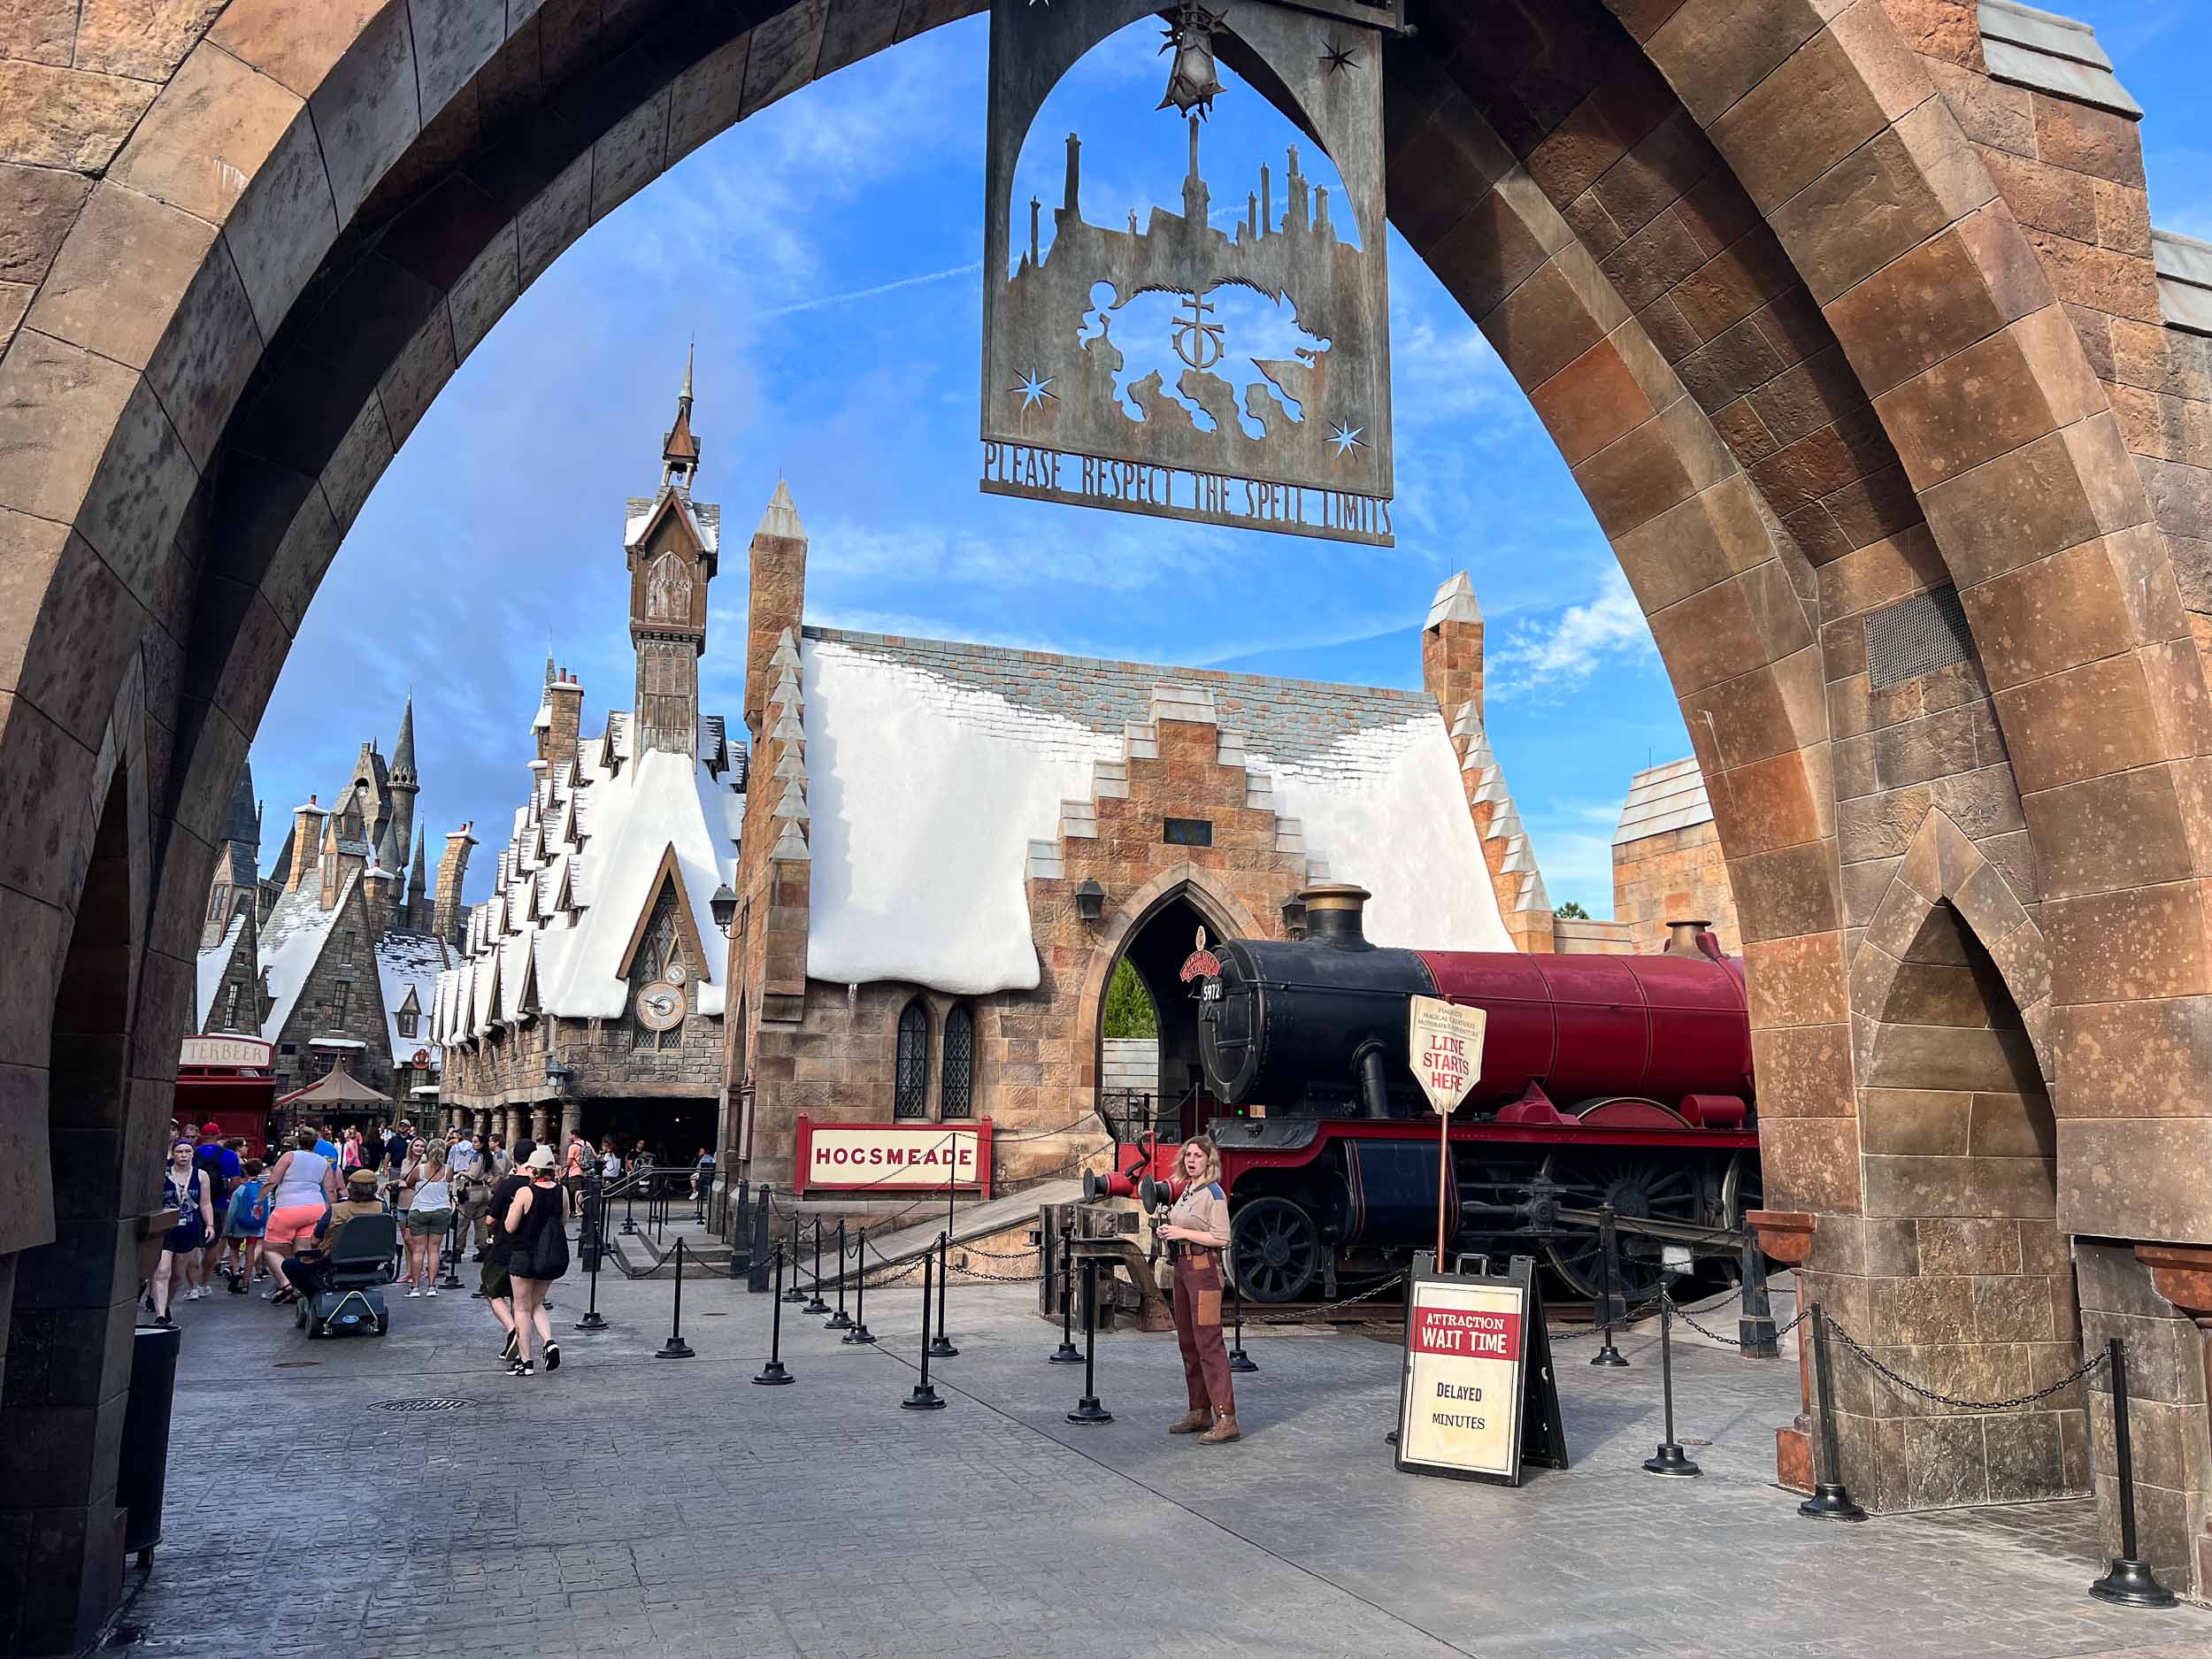 Height Requirements for Islands of Adventure Rides — UO FAN GUIDE